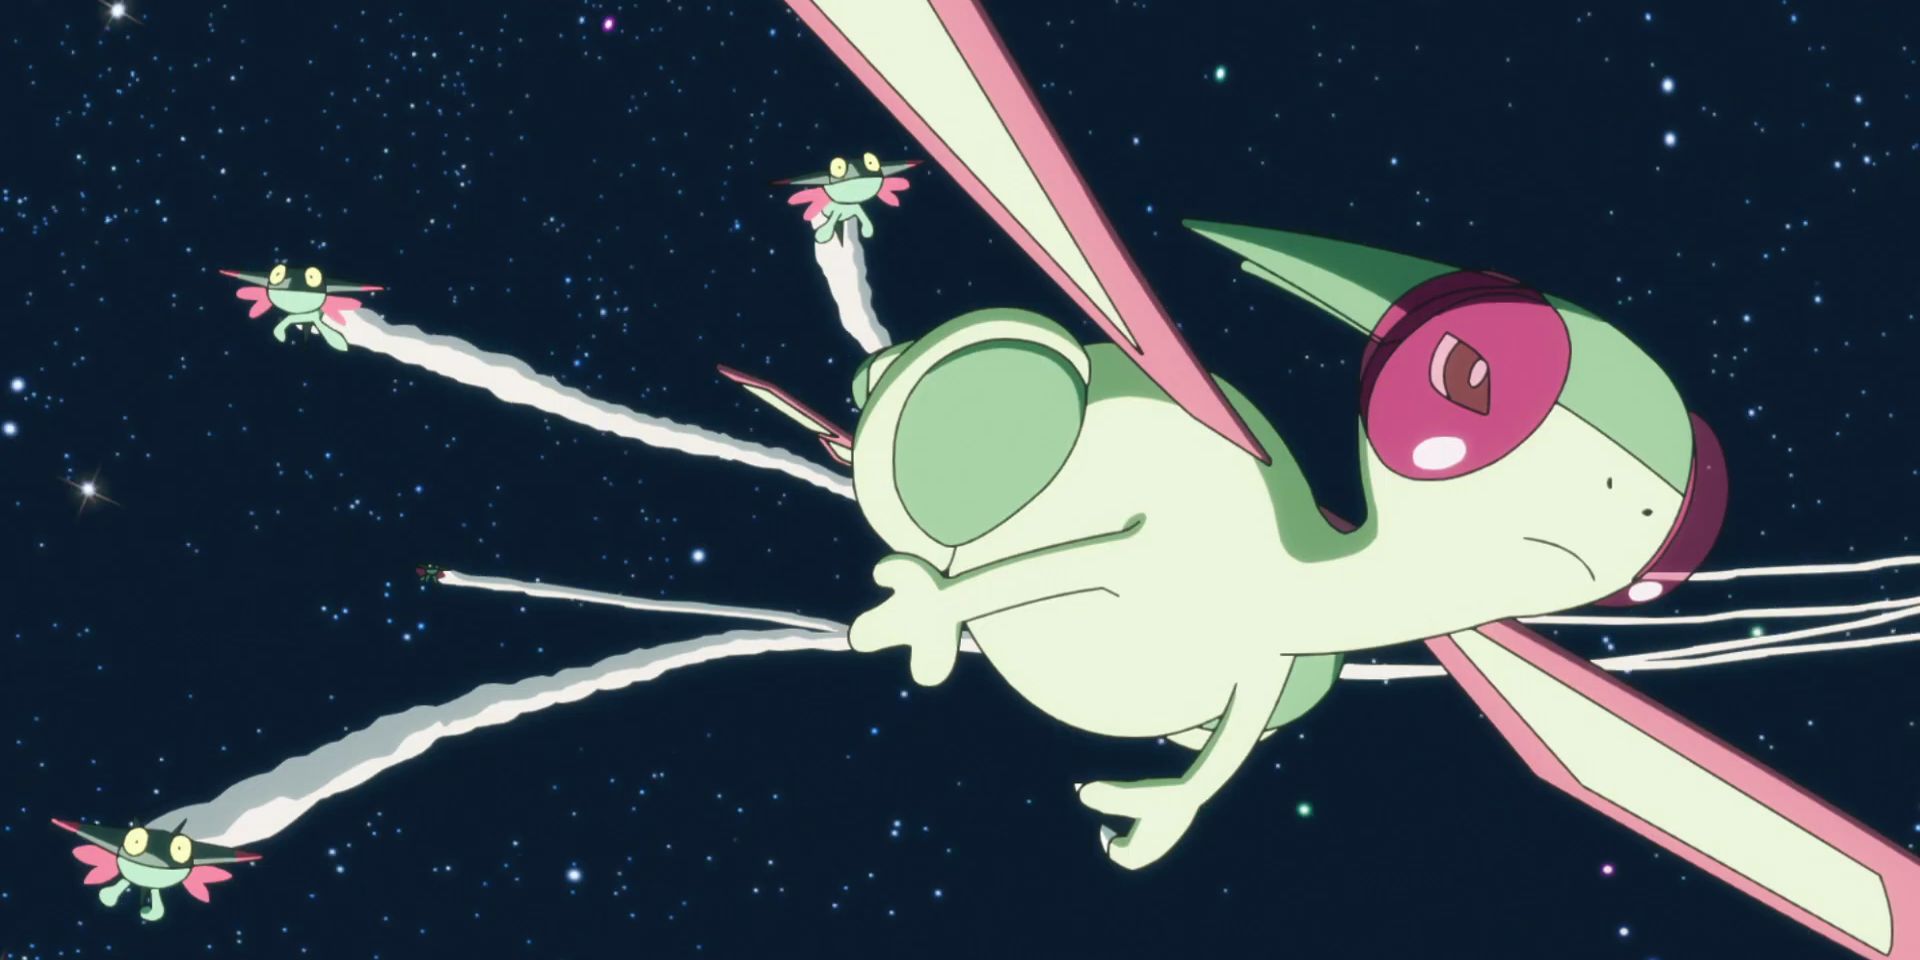 Flygon soaring through the air with Dreepy behind it in the Twilight Wings anime.